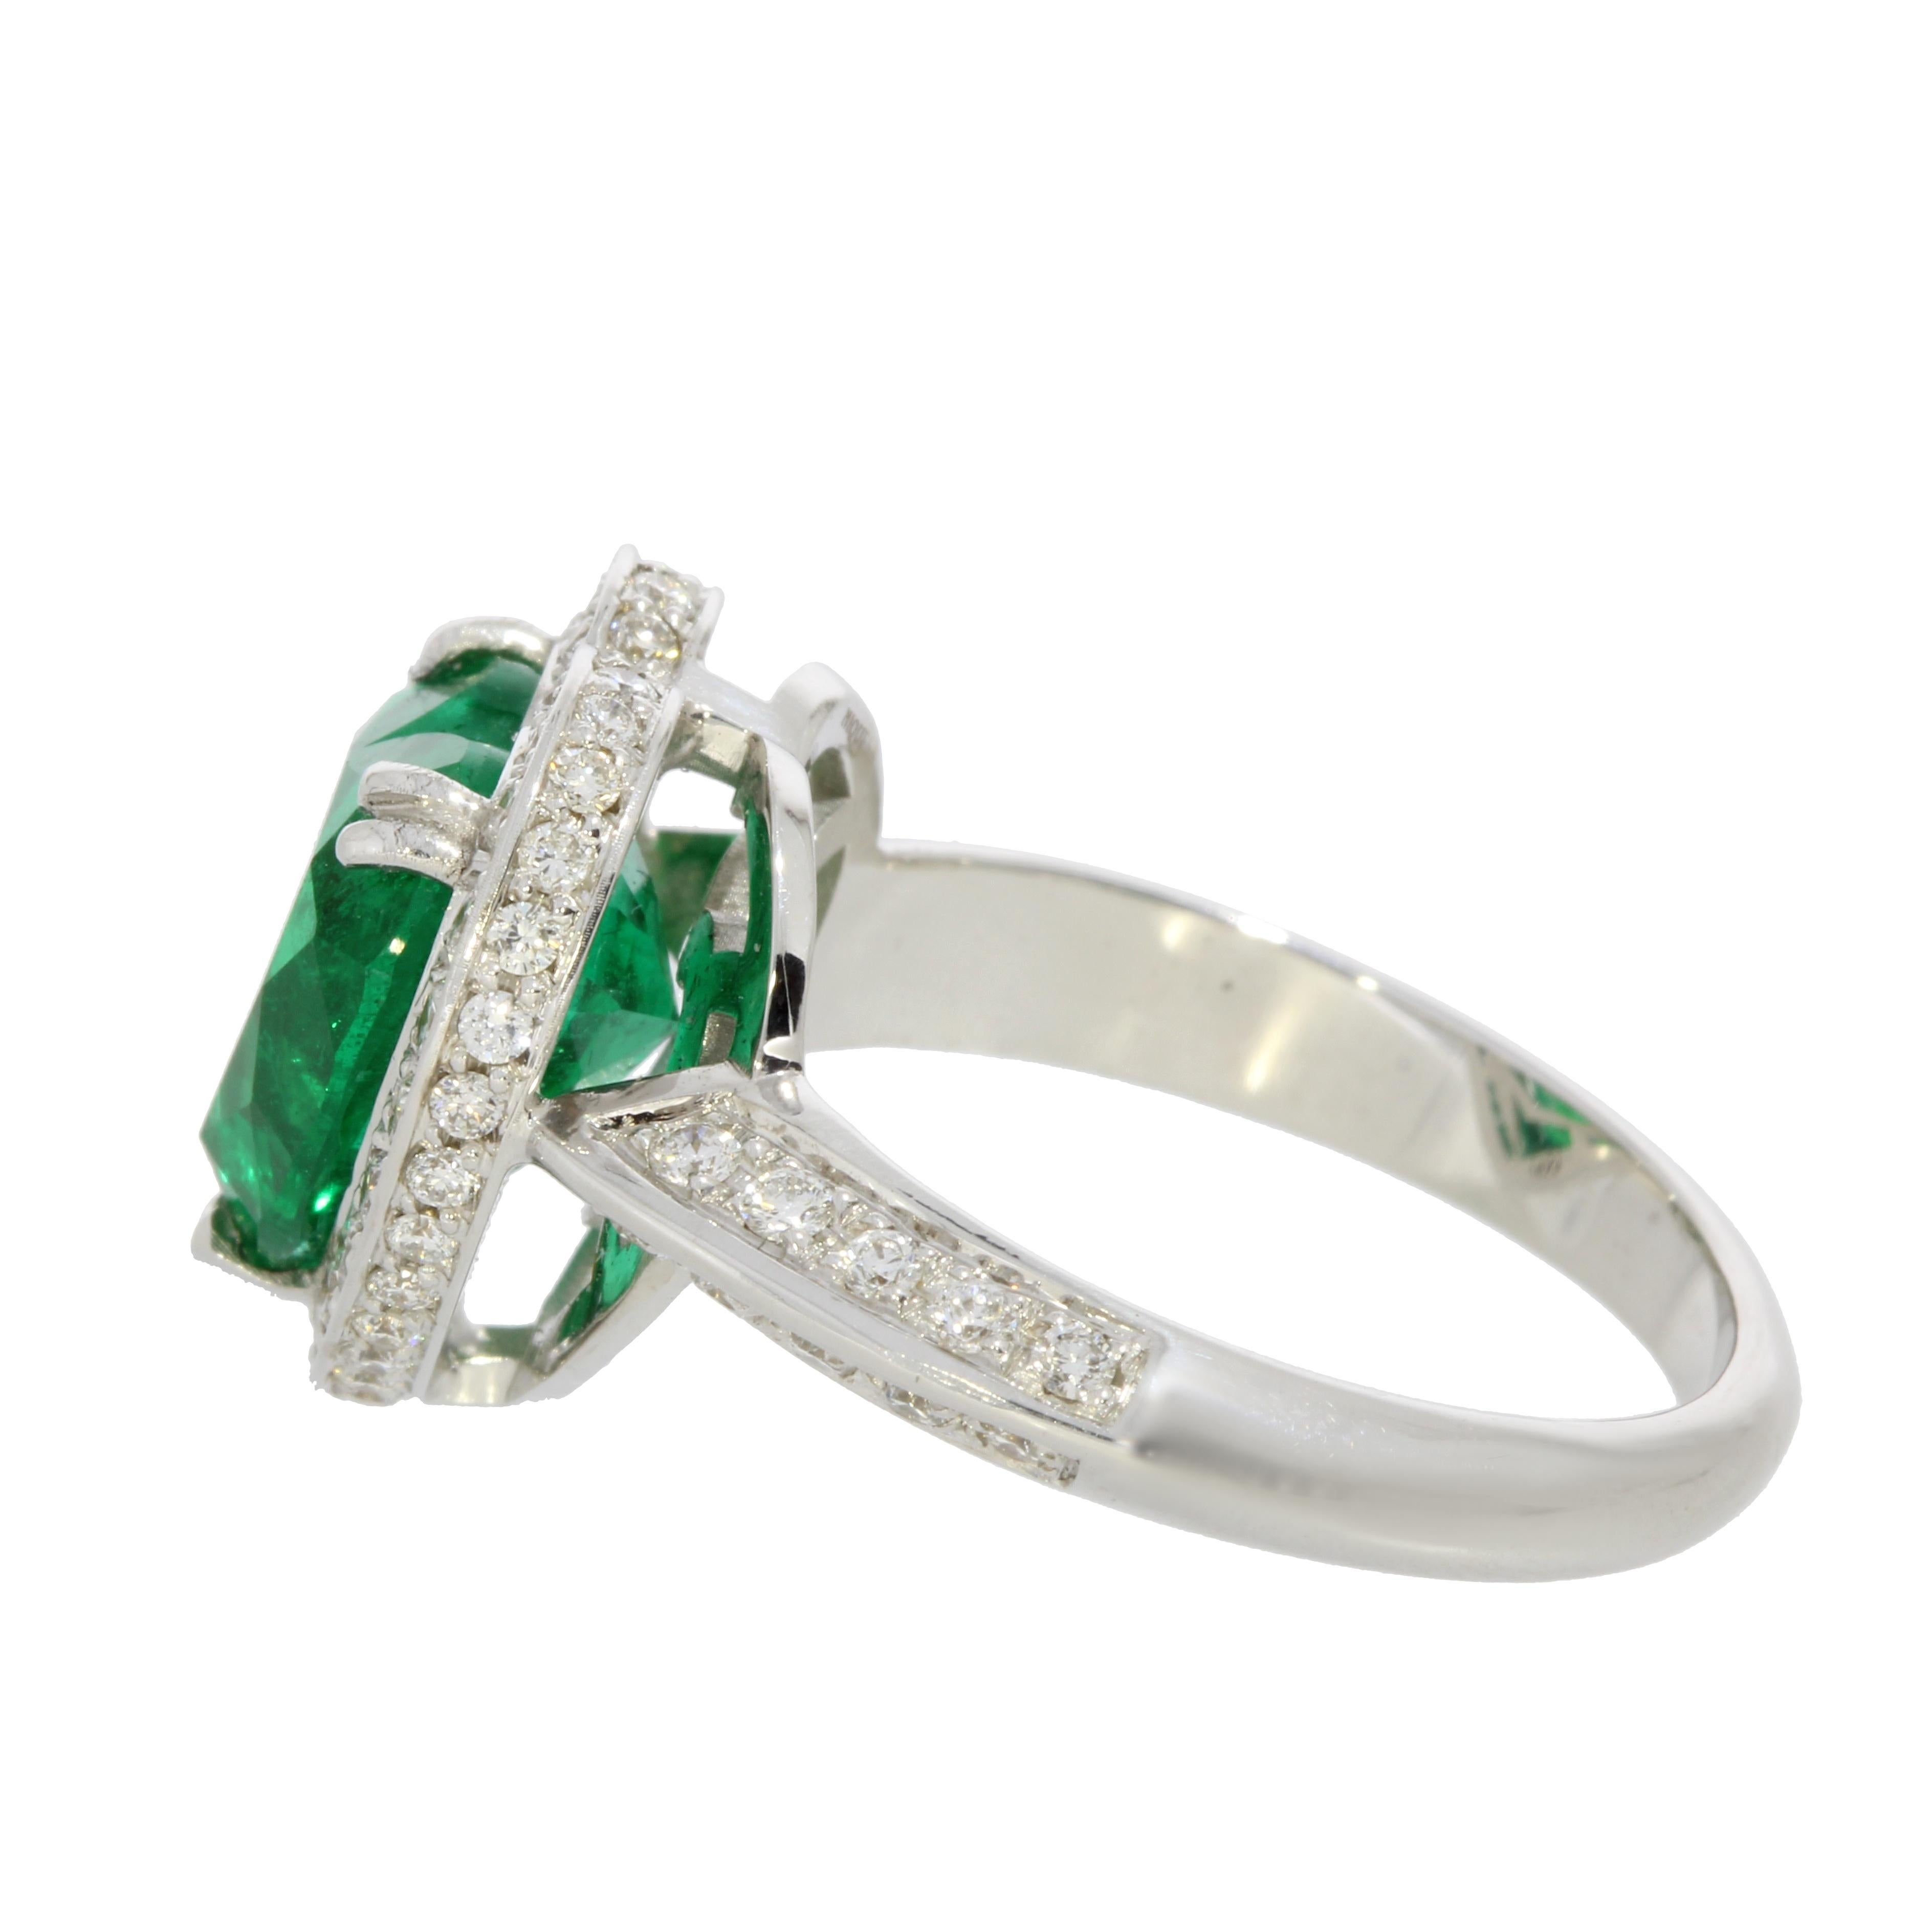 Heart Cut Emerald and Diamond Heart Ring 18 Karat White Gold Collection by Niquesa